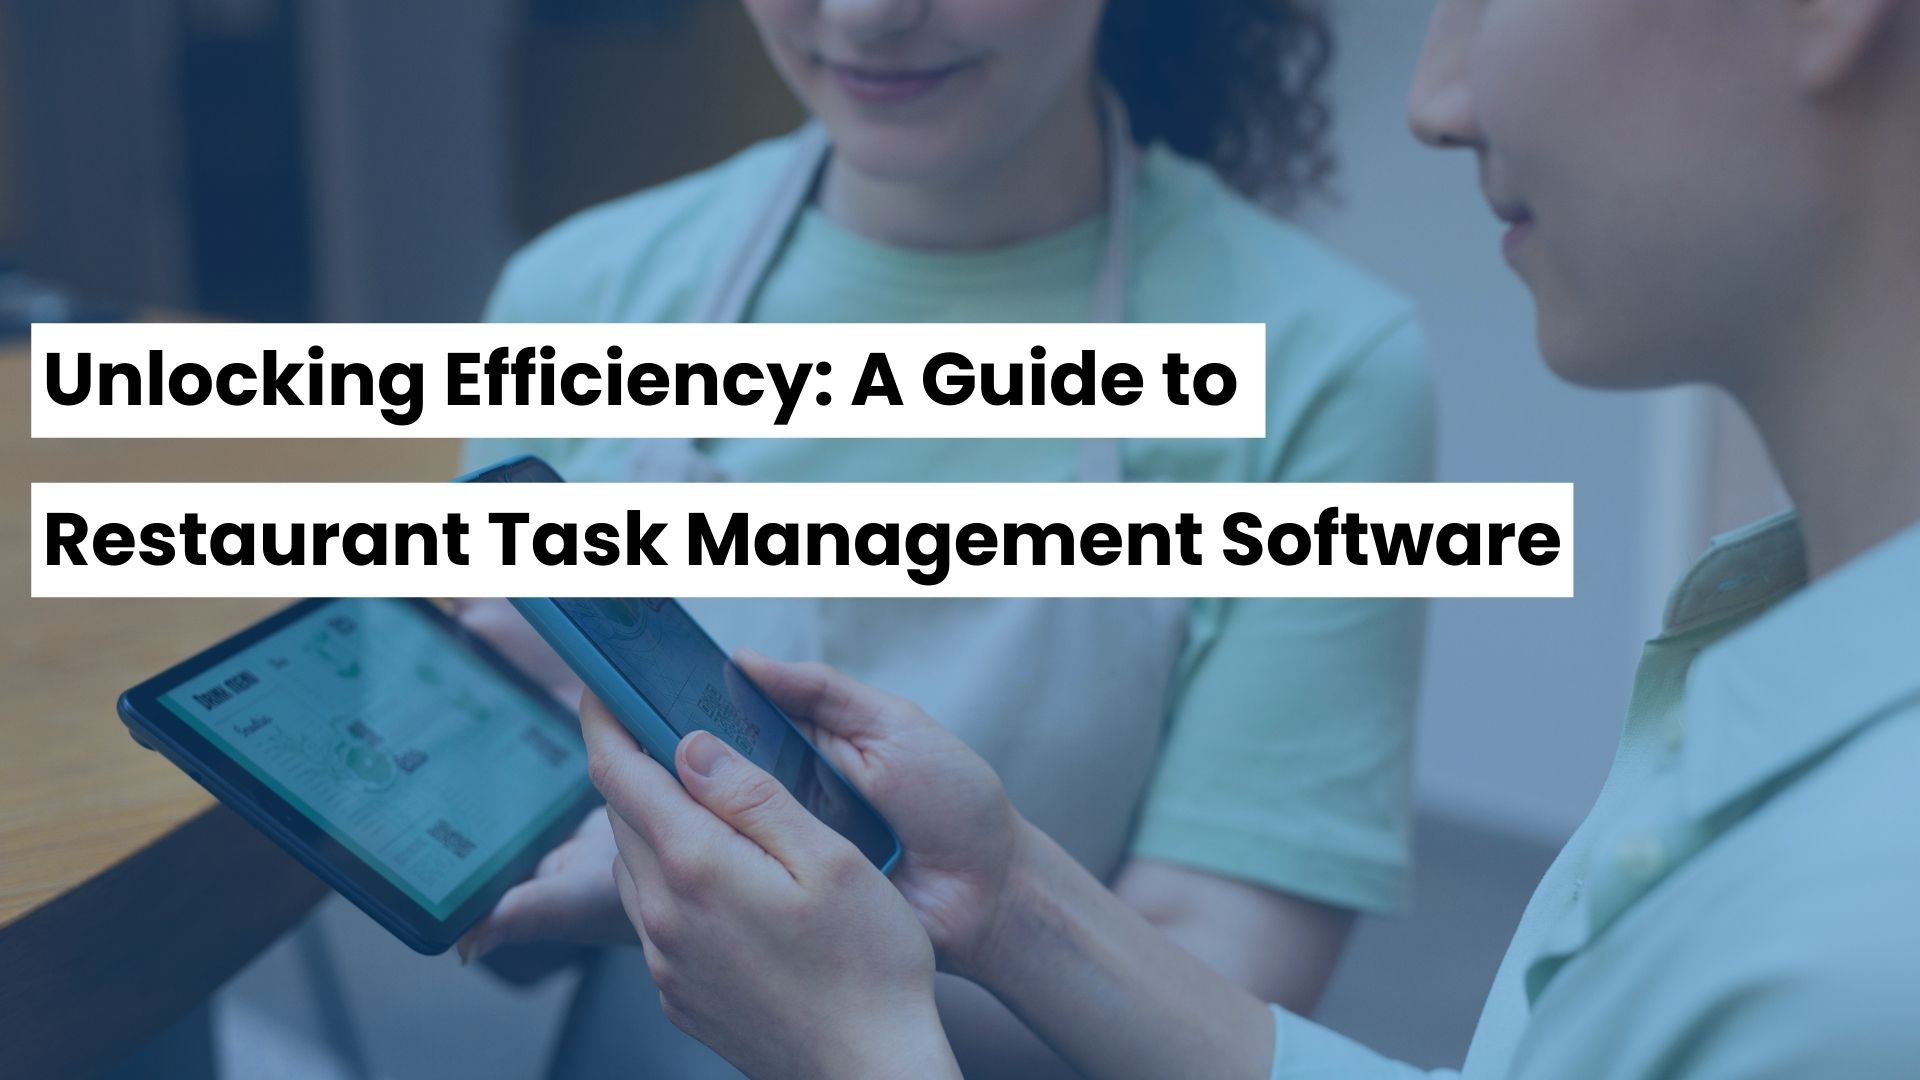 Unlocking Efficiency: A Guide to Restaurant Task Management Software